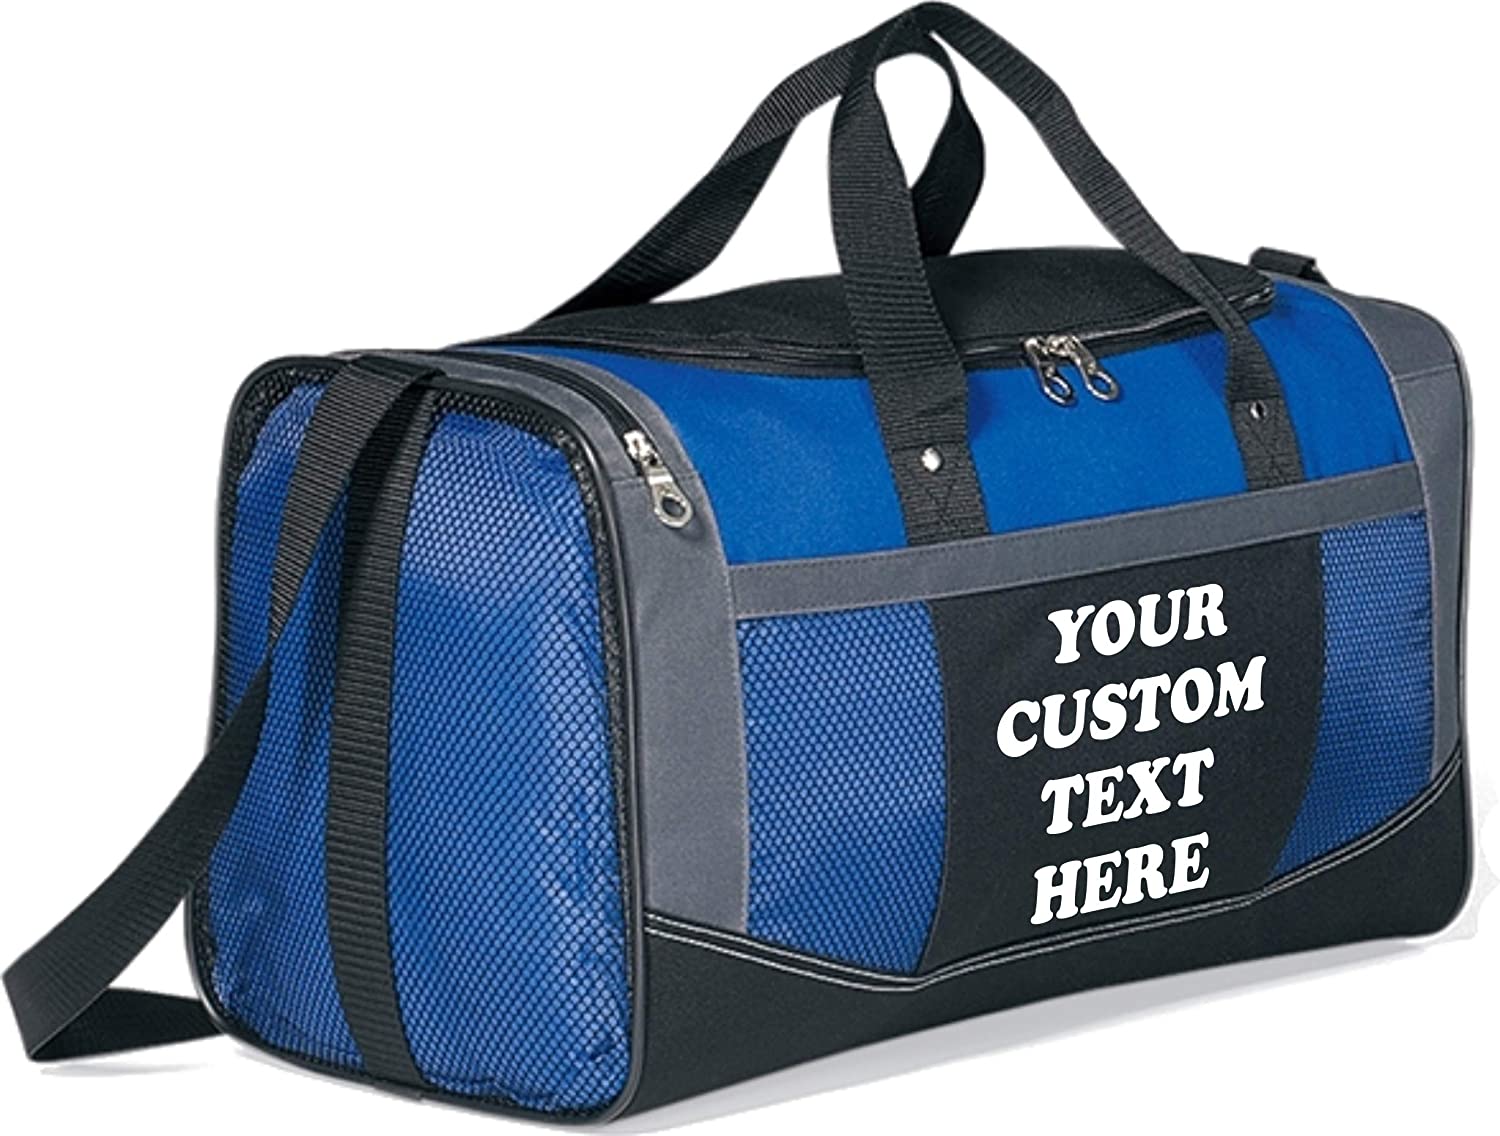 customized bags